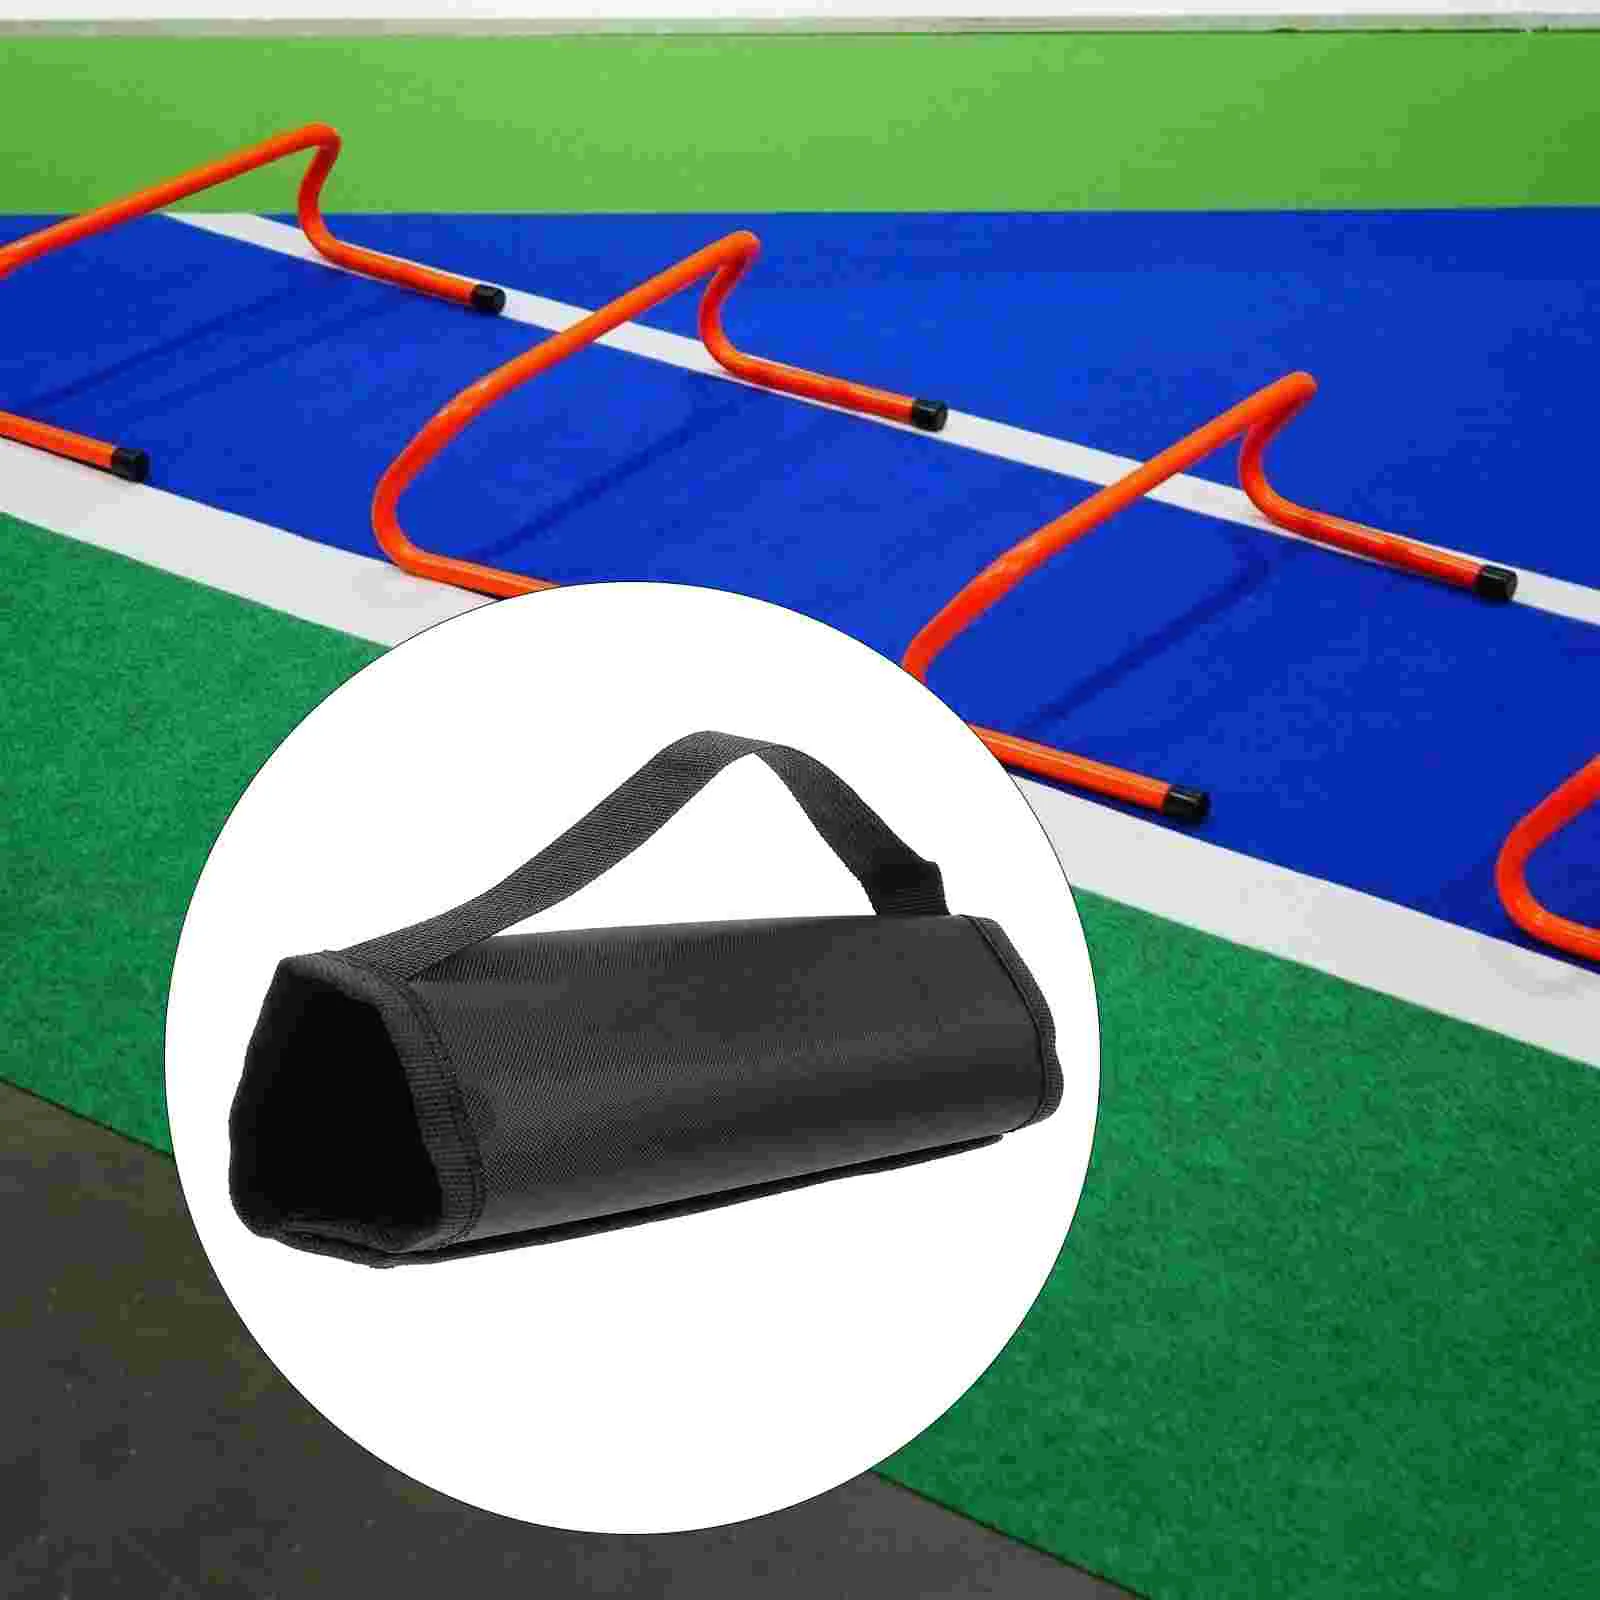 

Training Equipment Carrier Accessories Hurdlessoccer Storagehurdle Carry Football Agility Clothset Container Wrapper